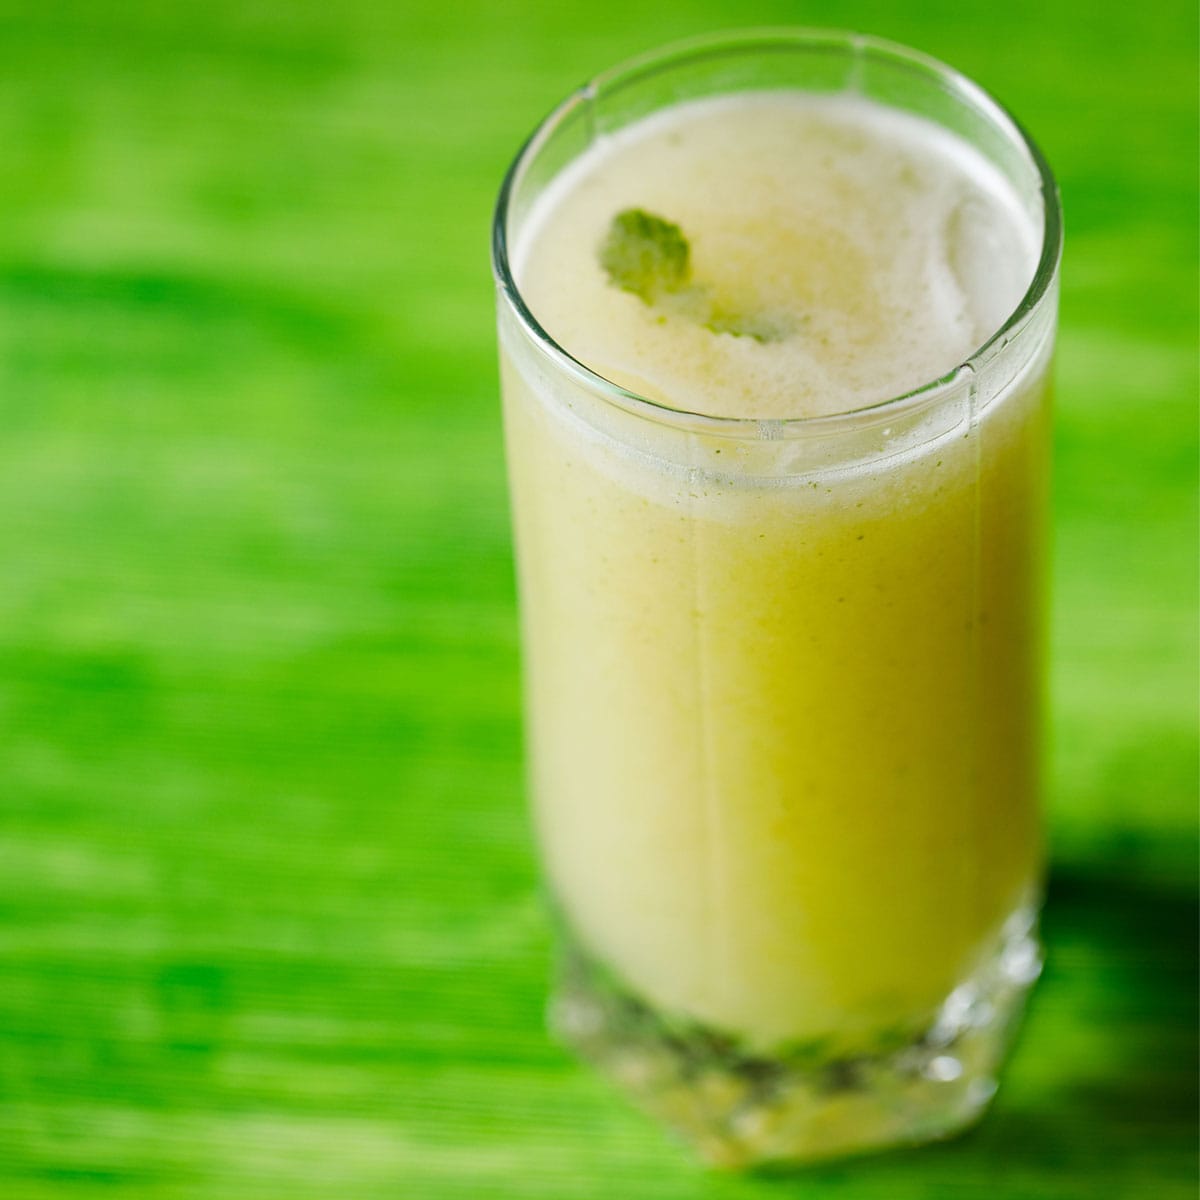 roasted aam panna in a glass on a green table.